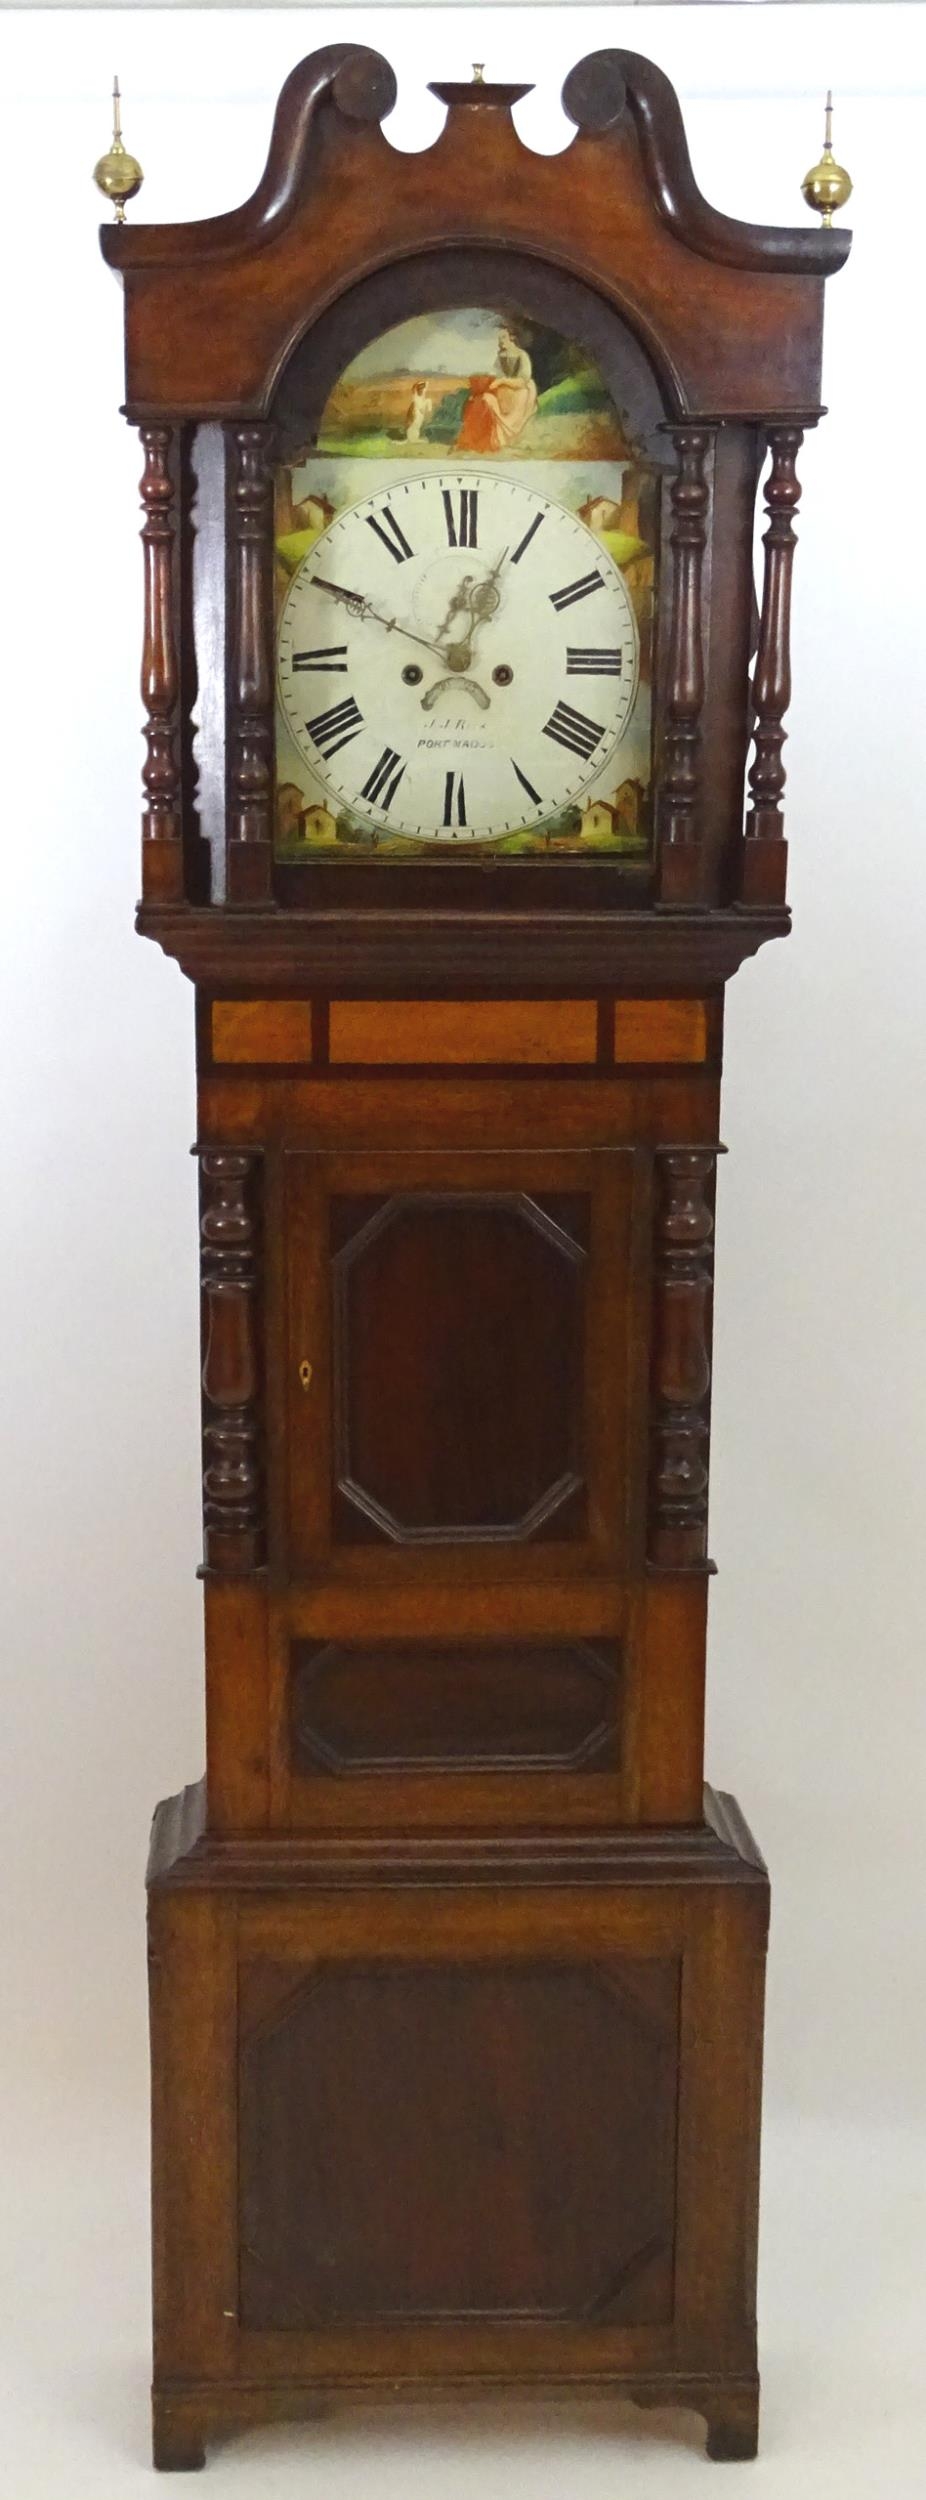 J J Rees Port Madoc : A Welsh Victorian longcase clock with 14" painted dial and 8-day movement. The - Image 9 of 14